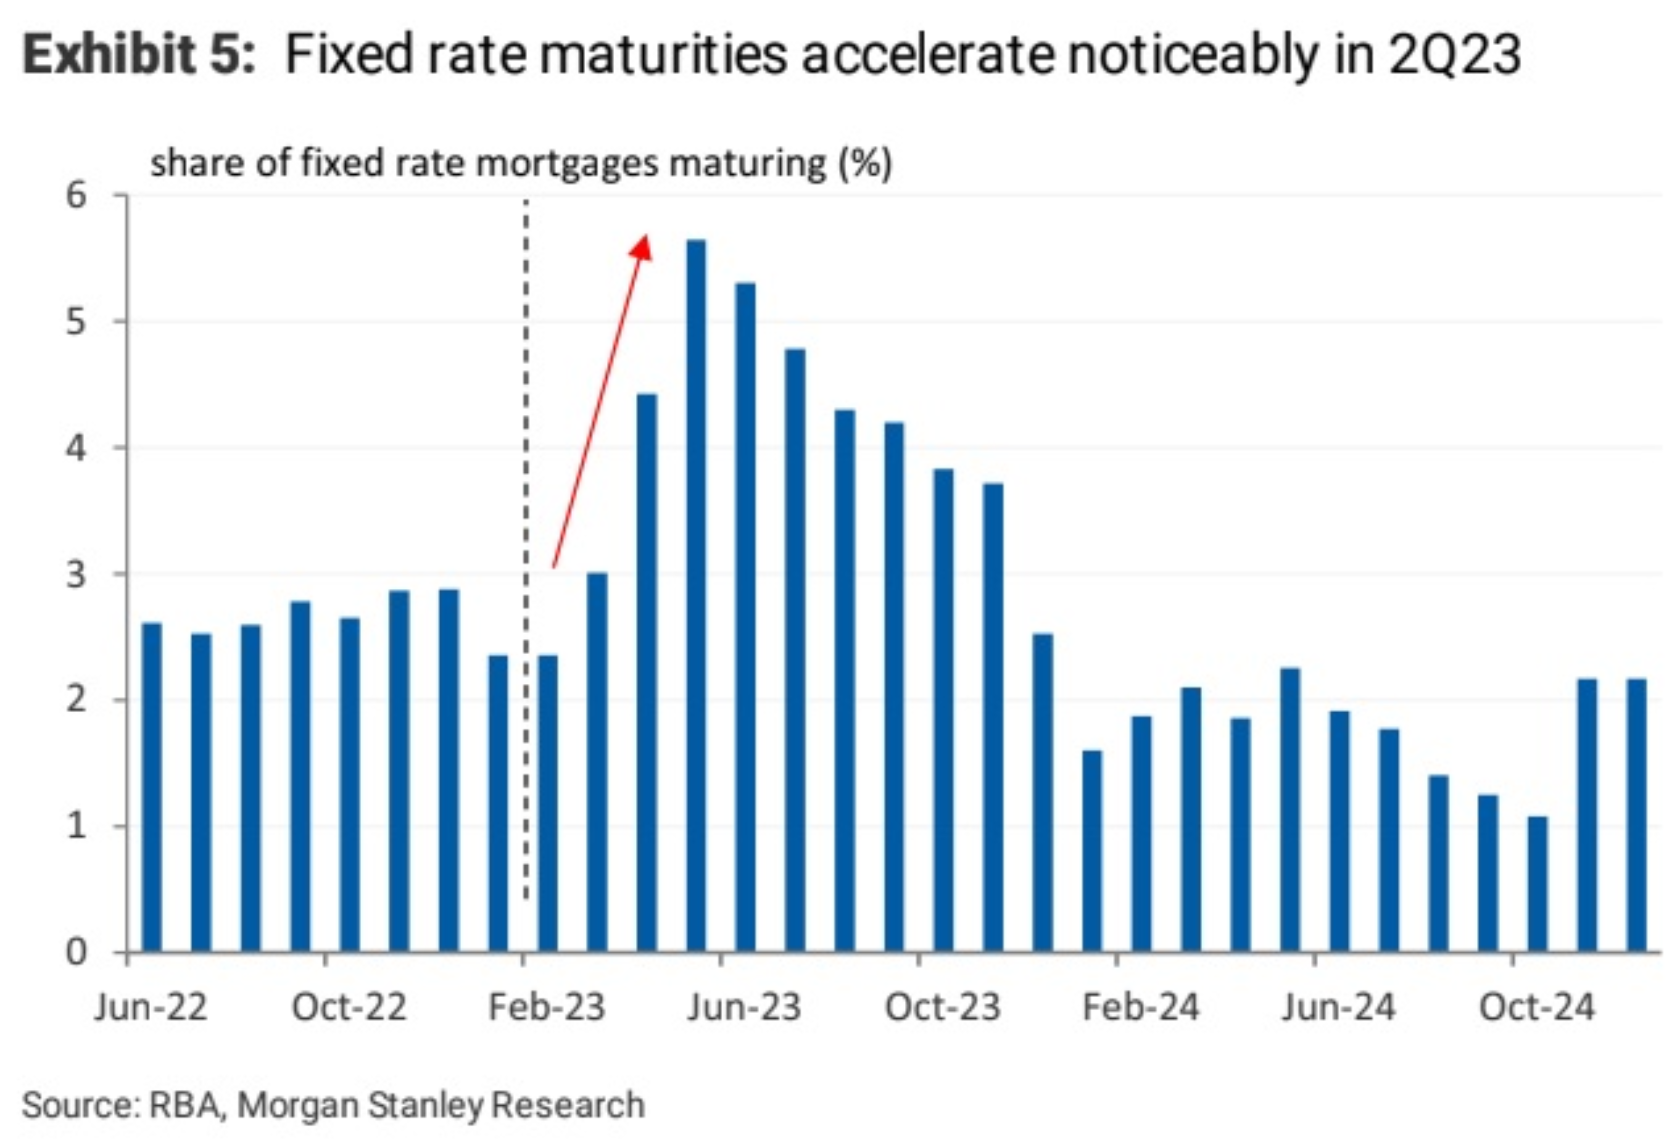 Fixed rate mortgage securities